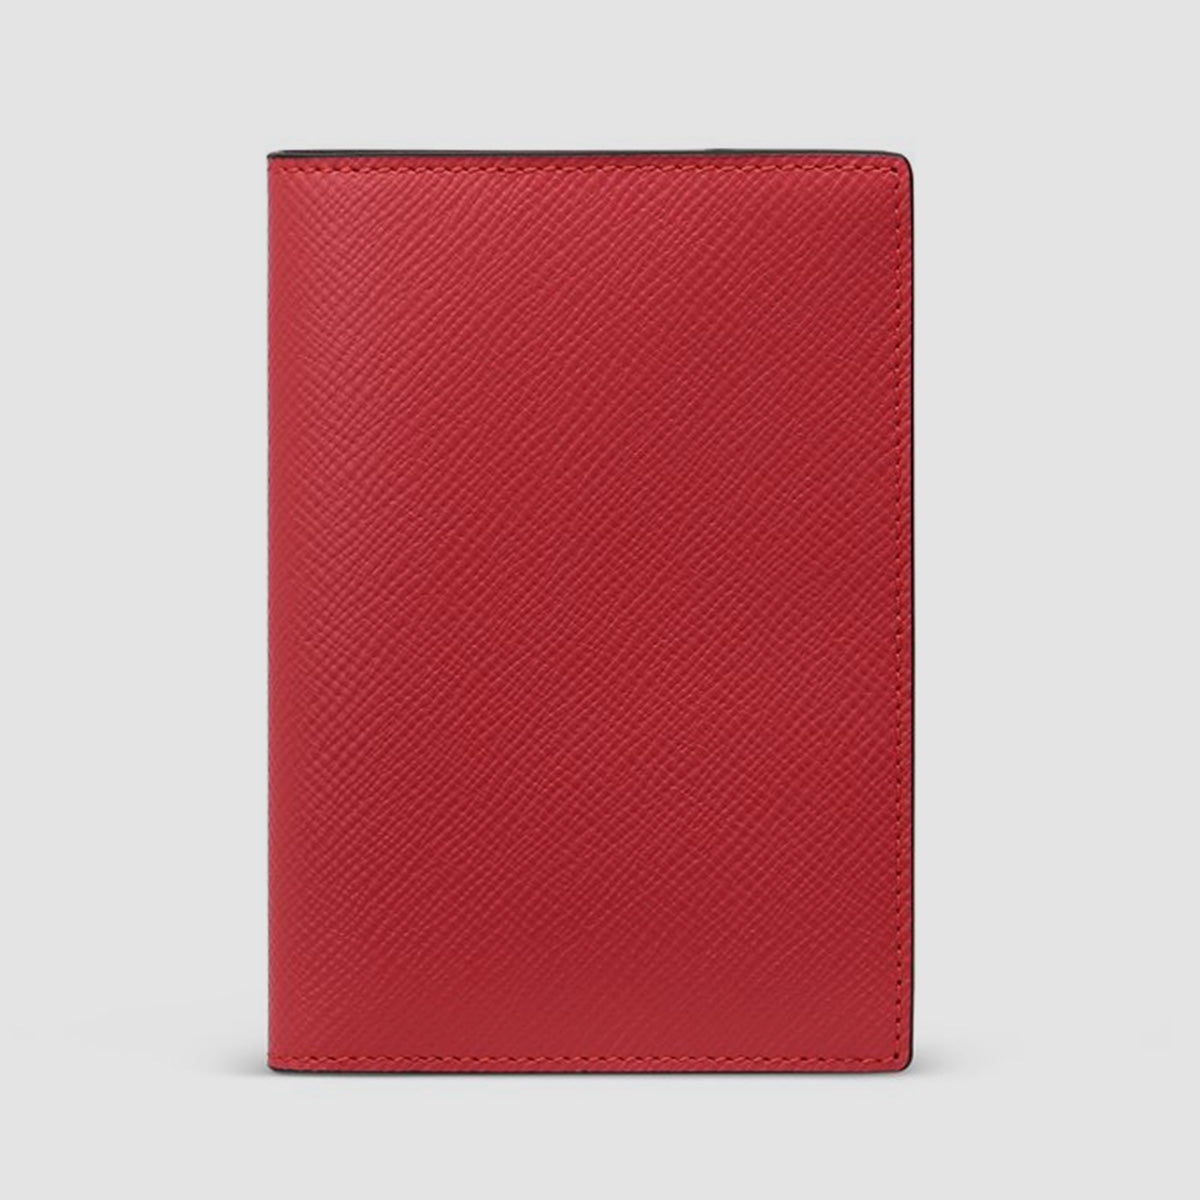 Passport Cover in Panama - Scarlet Red